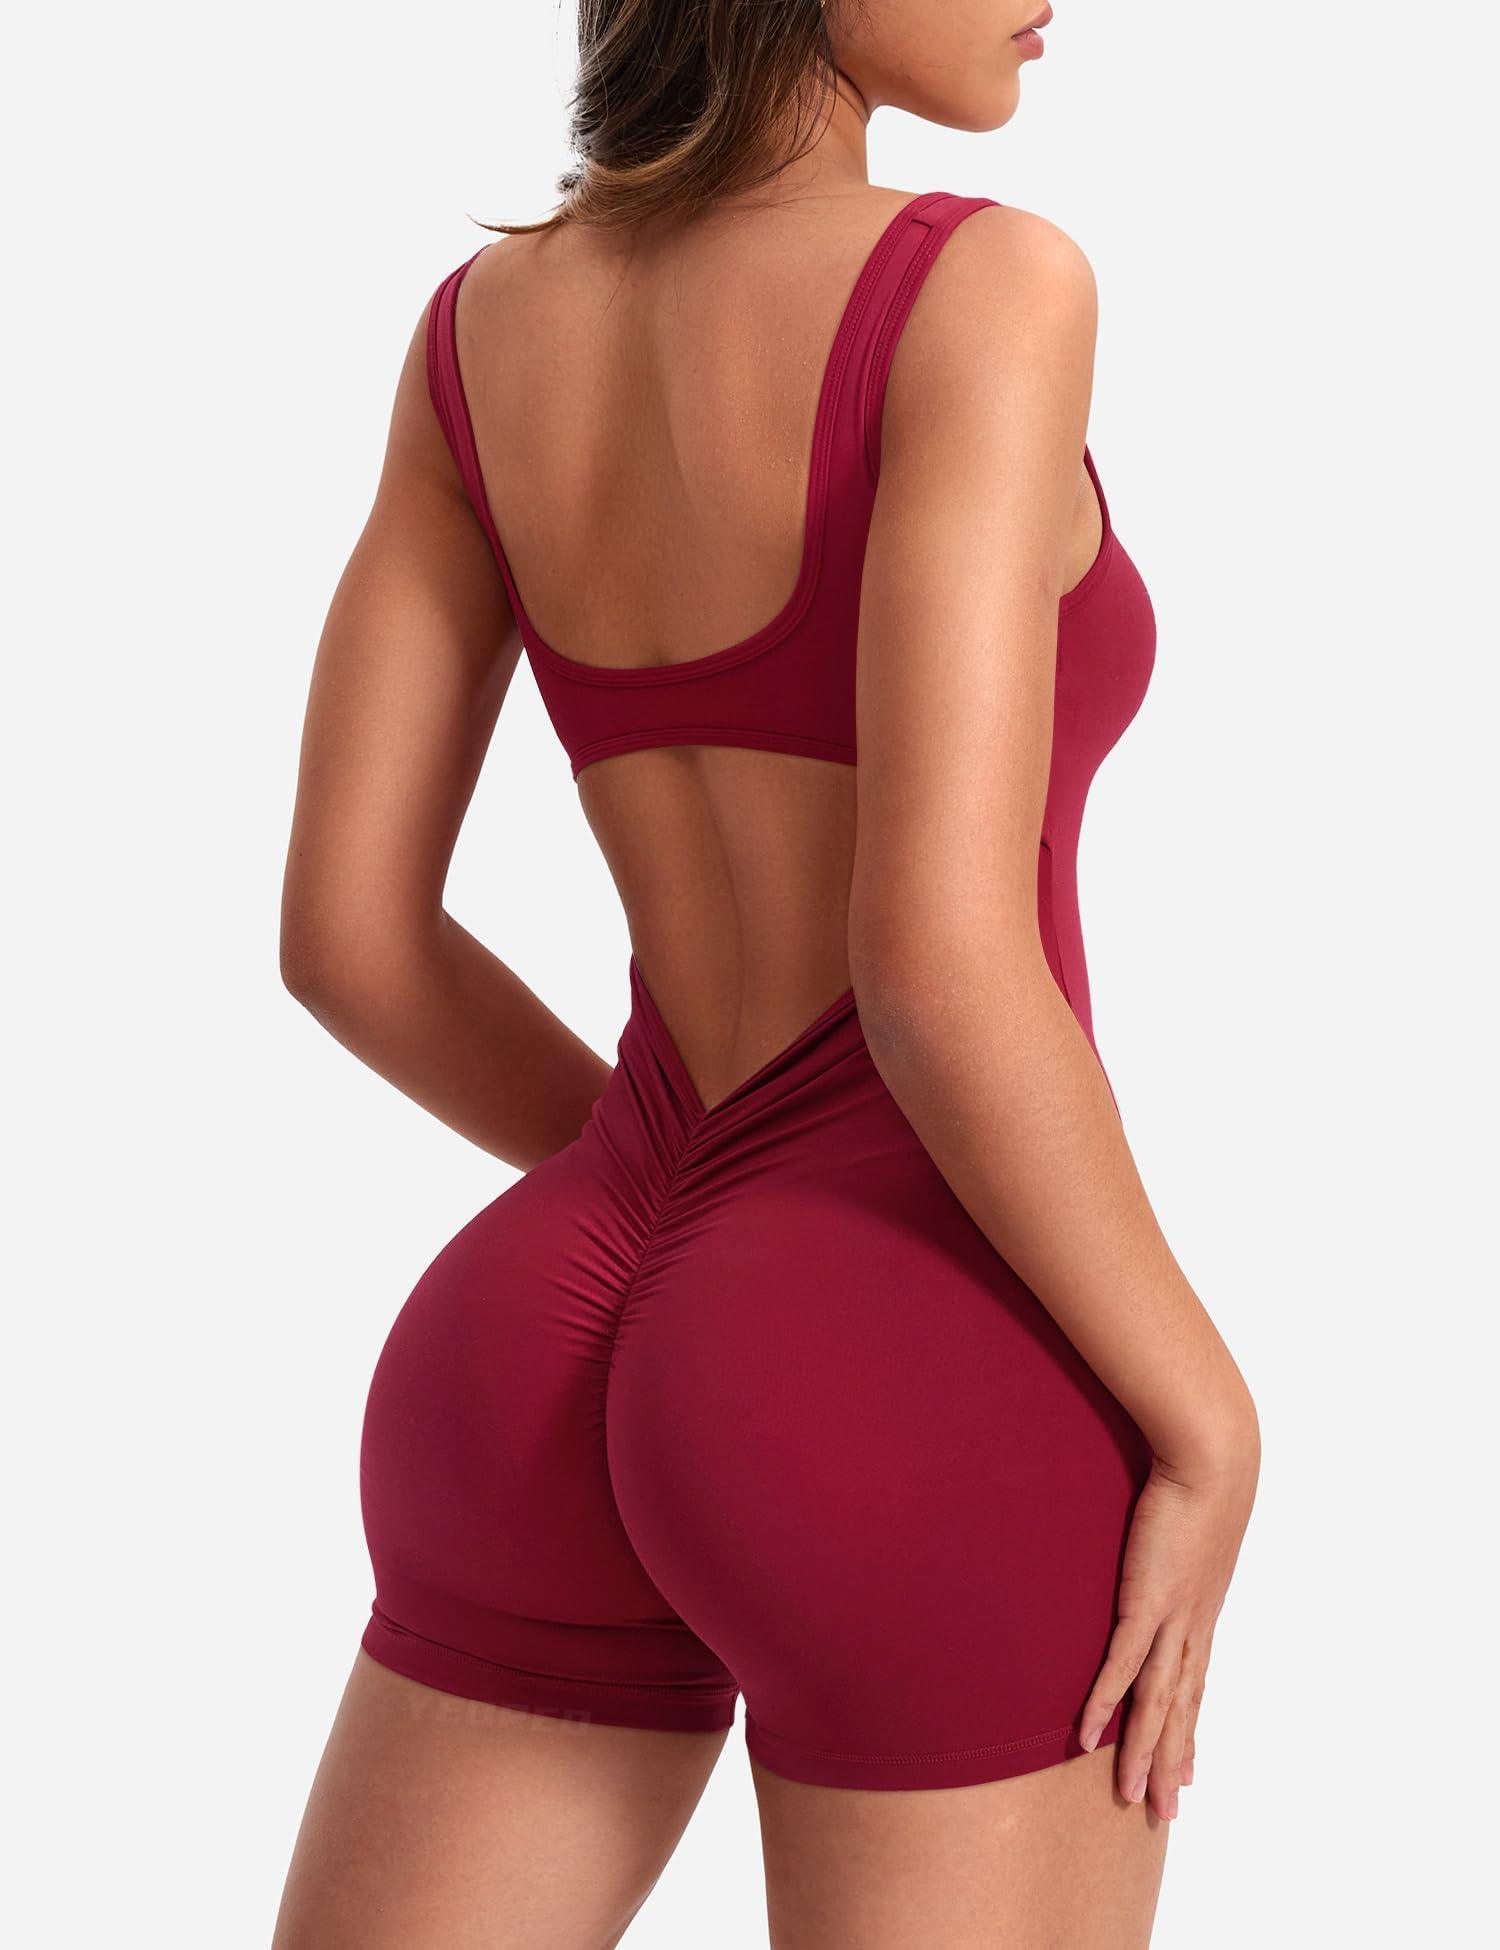 YEOREO One Piece Jumpsuits for Women Sleeveless Backless Workout Jumpsuits Bodycon Scrunch Butt V Back Gym Rompers Wine Red M - Bona Fide Fashion